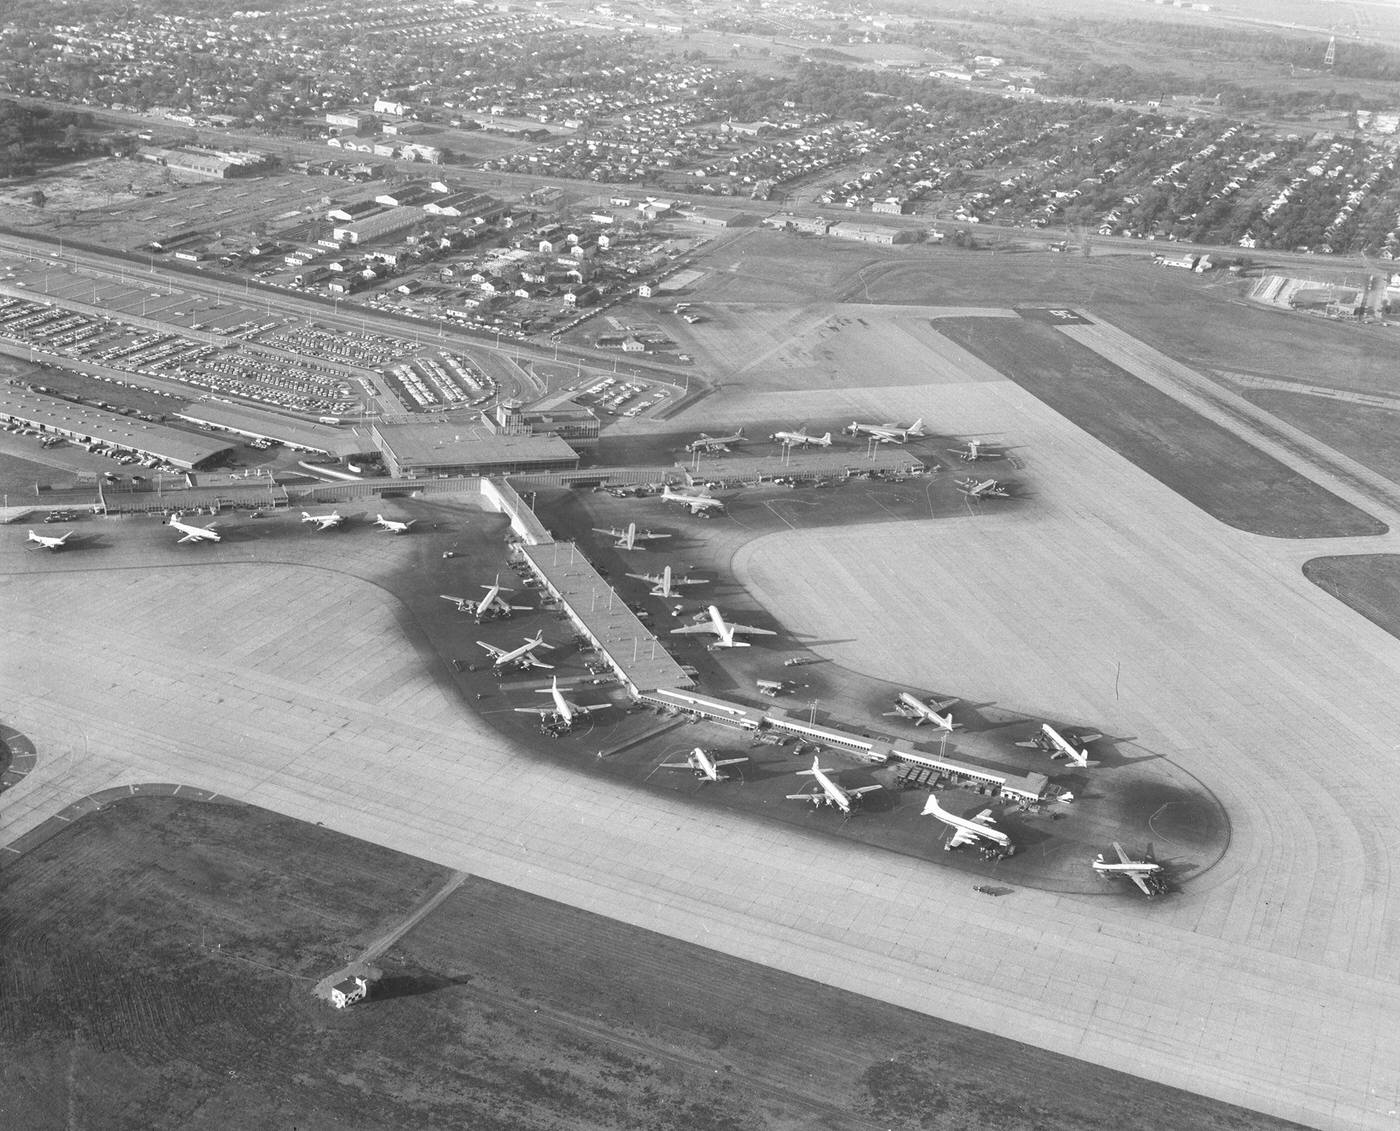 Aerial view of planes at Love Field at 7 a.m., Dallas, 1960